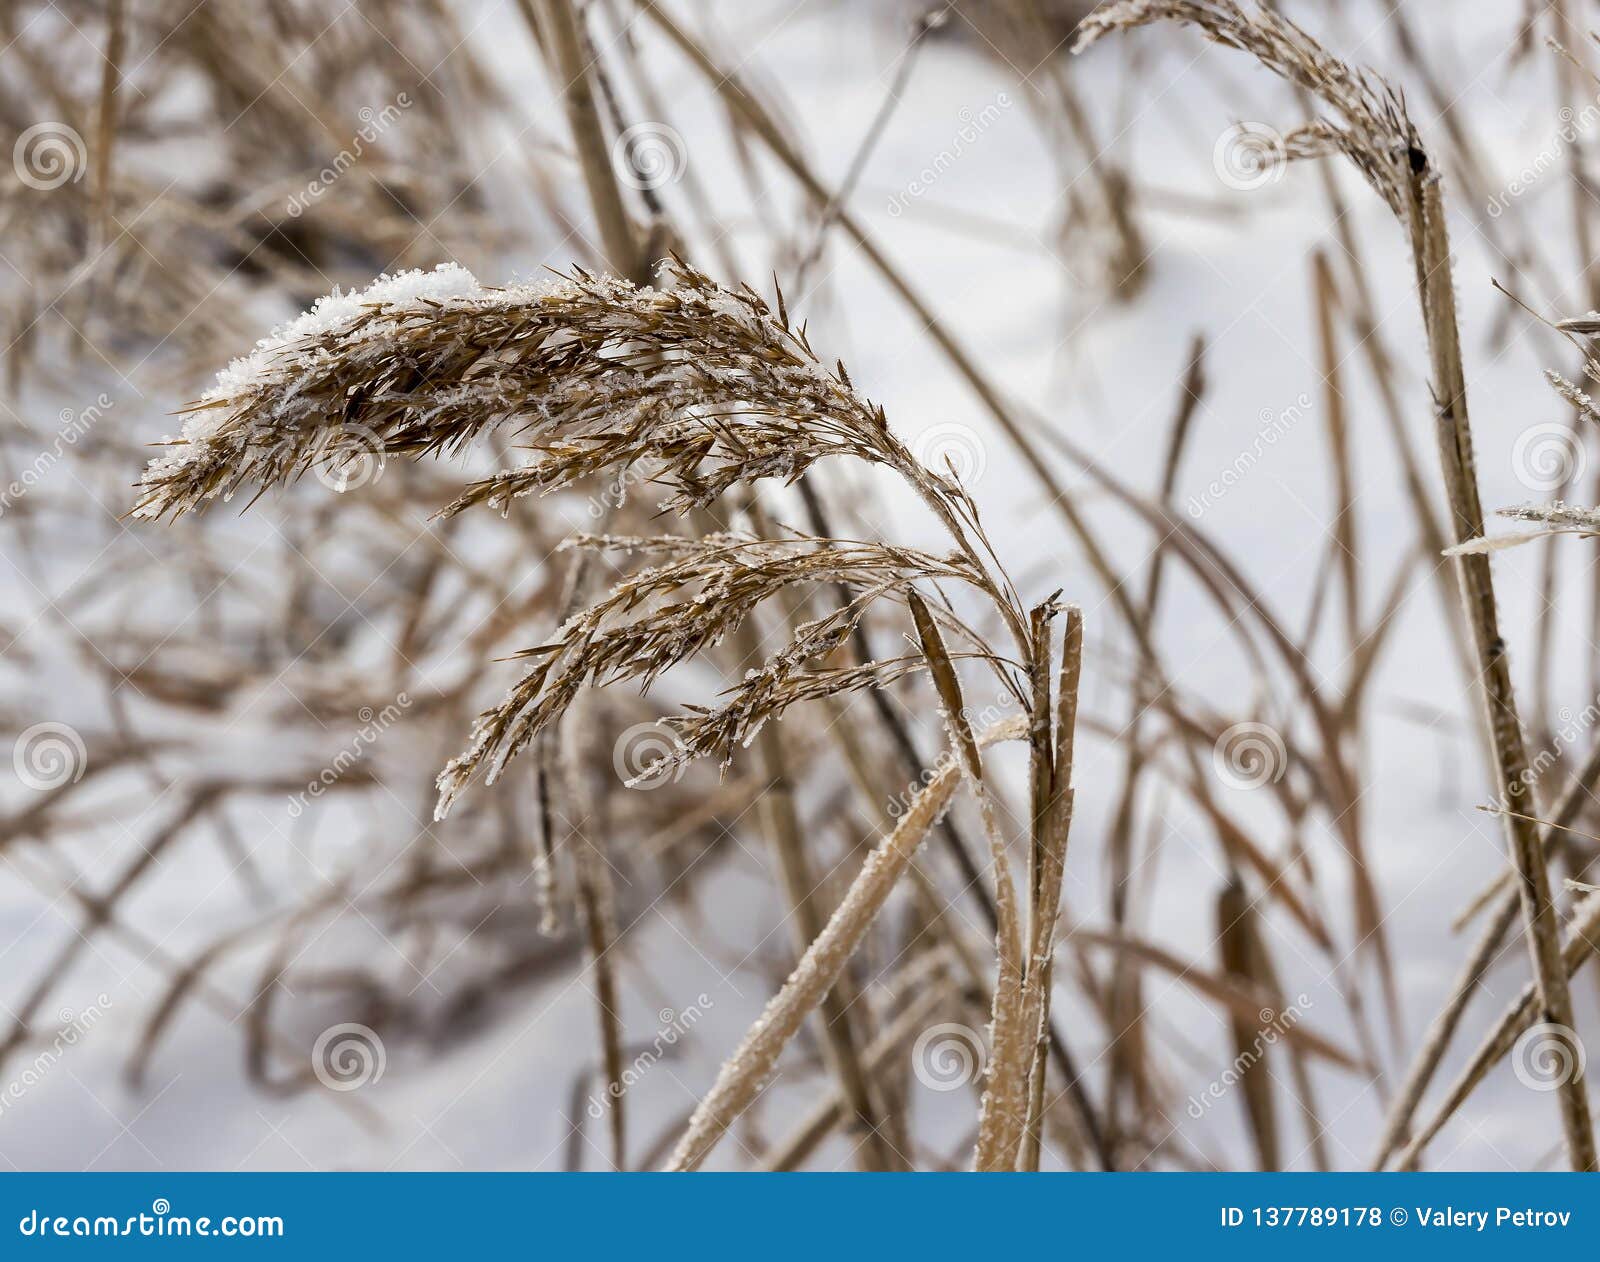 Fluffy Ear of a Weed Plant Covered with Snow and Ice Stock Photo ...